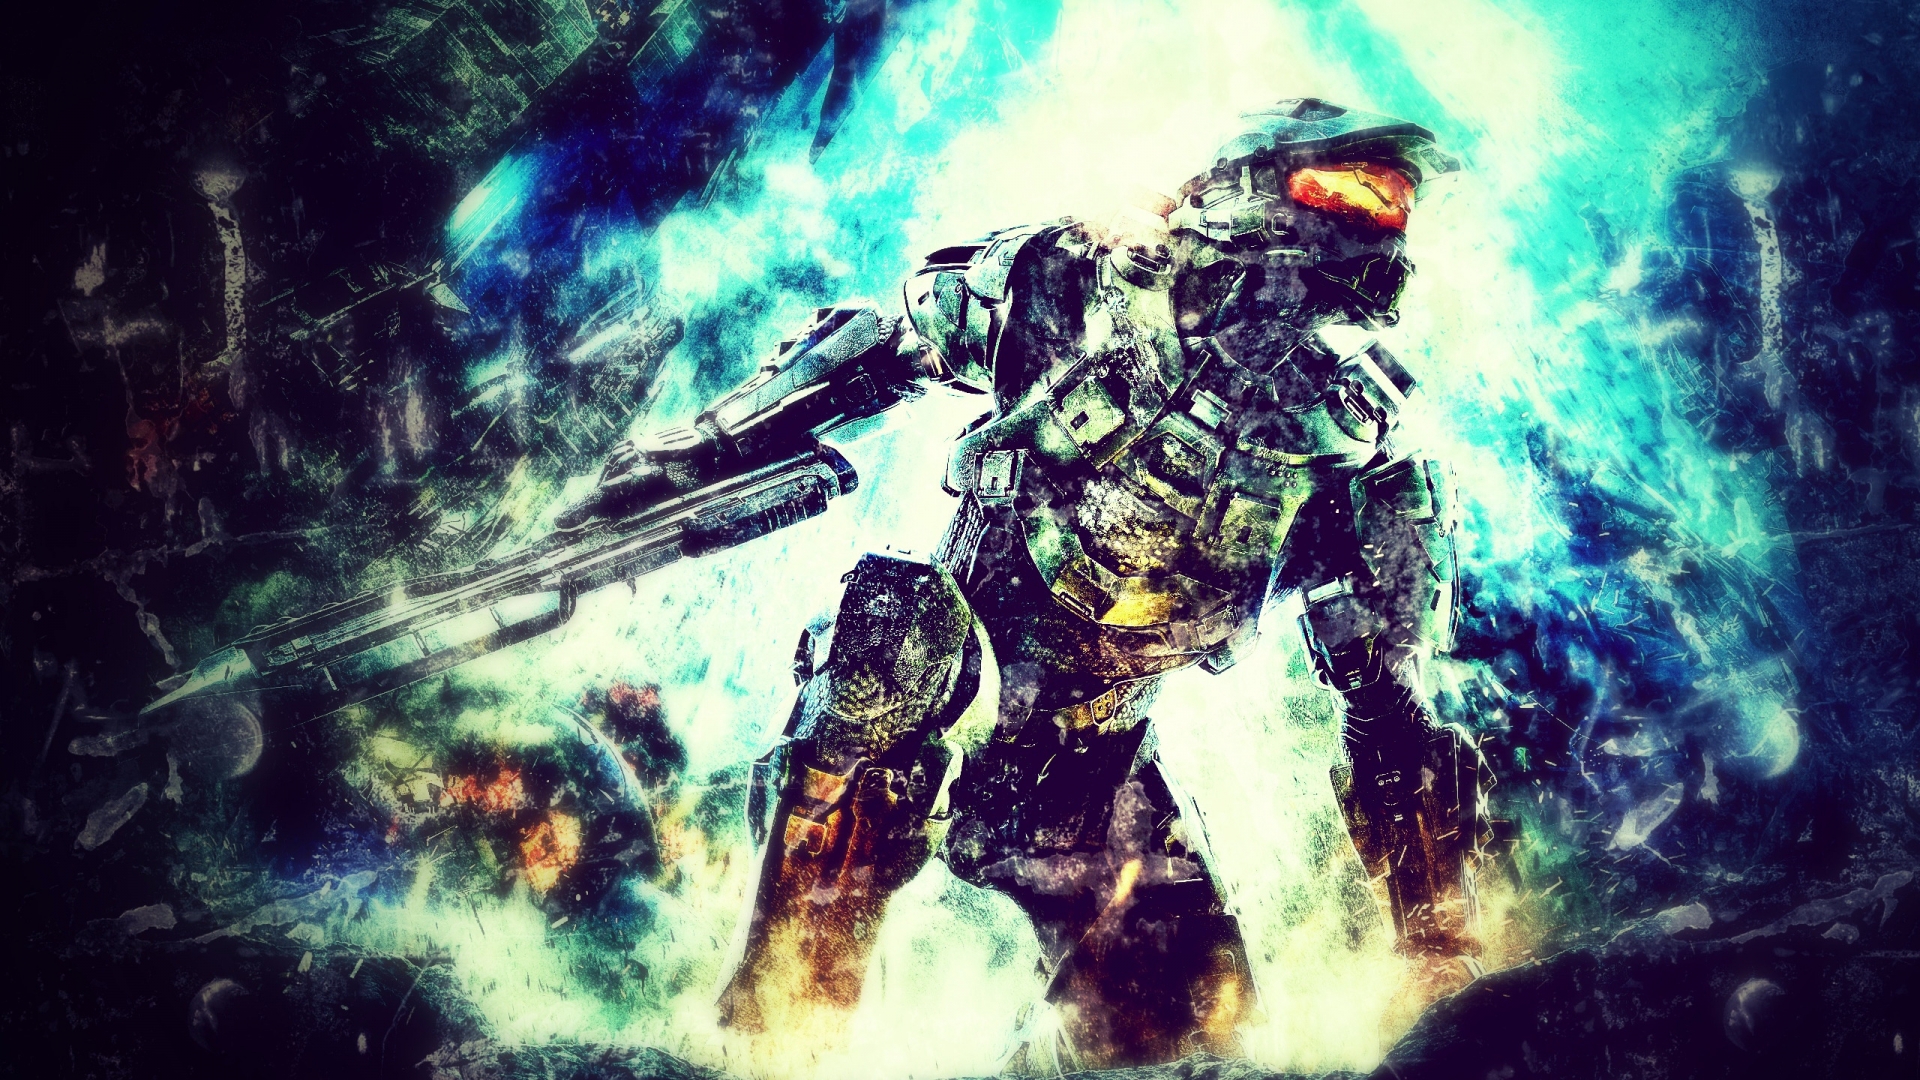 Halo 4 for 1920 x 1080 HDTV 1080p resolution